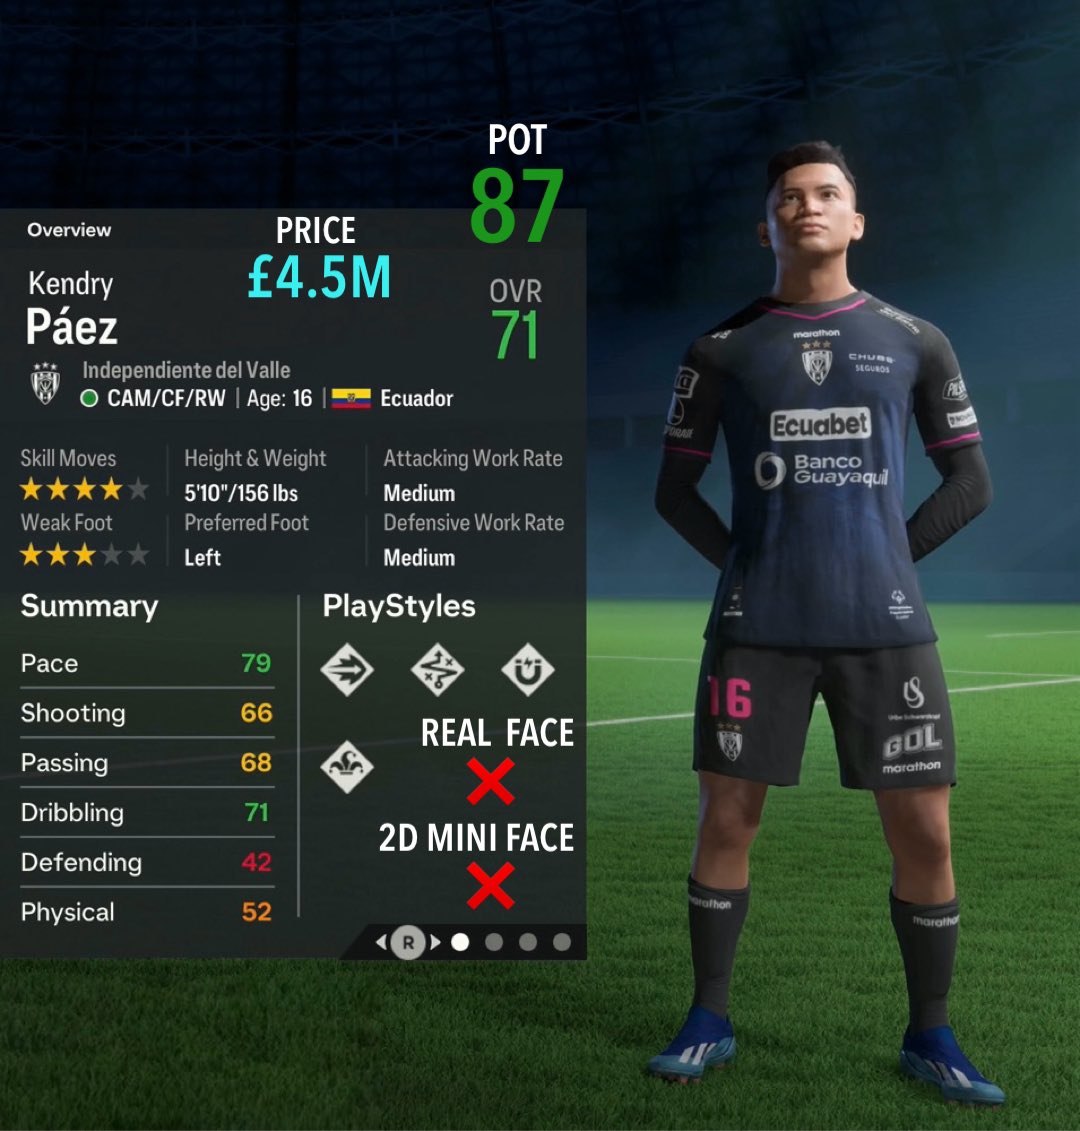 Career Mode
Gem of the Day
• Recently Added
• Exciting Prospect
#FC24